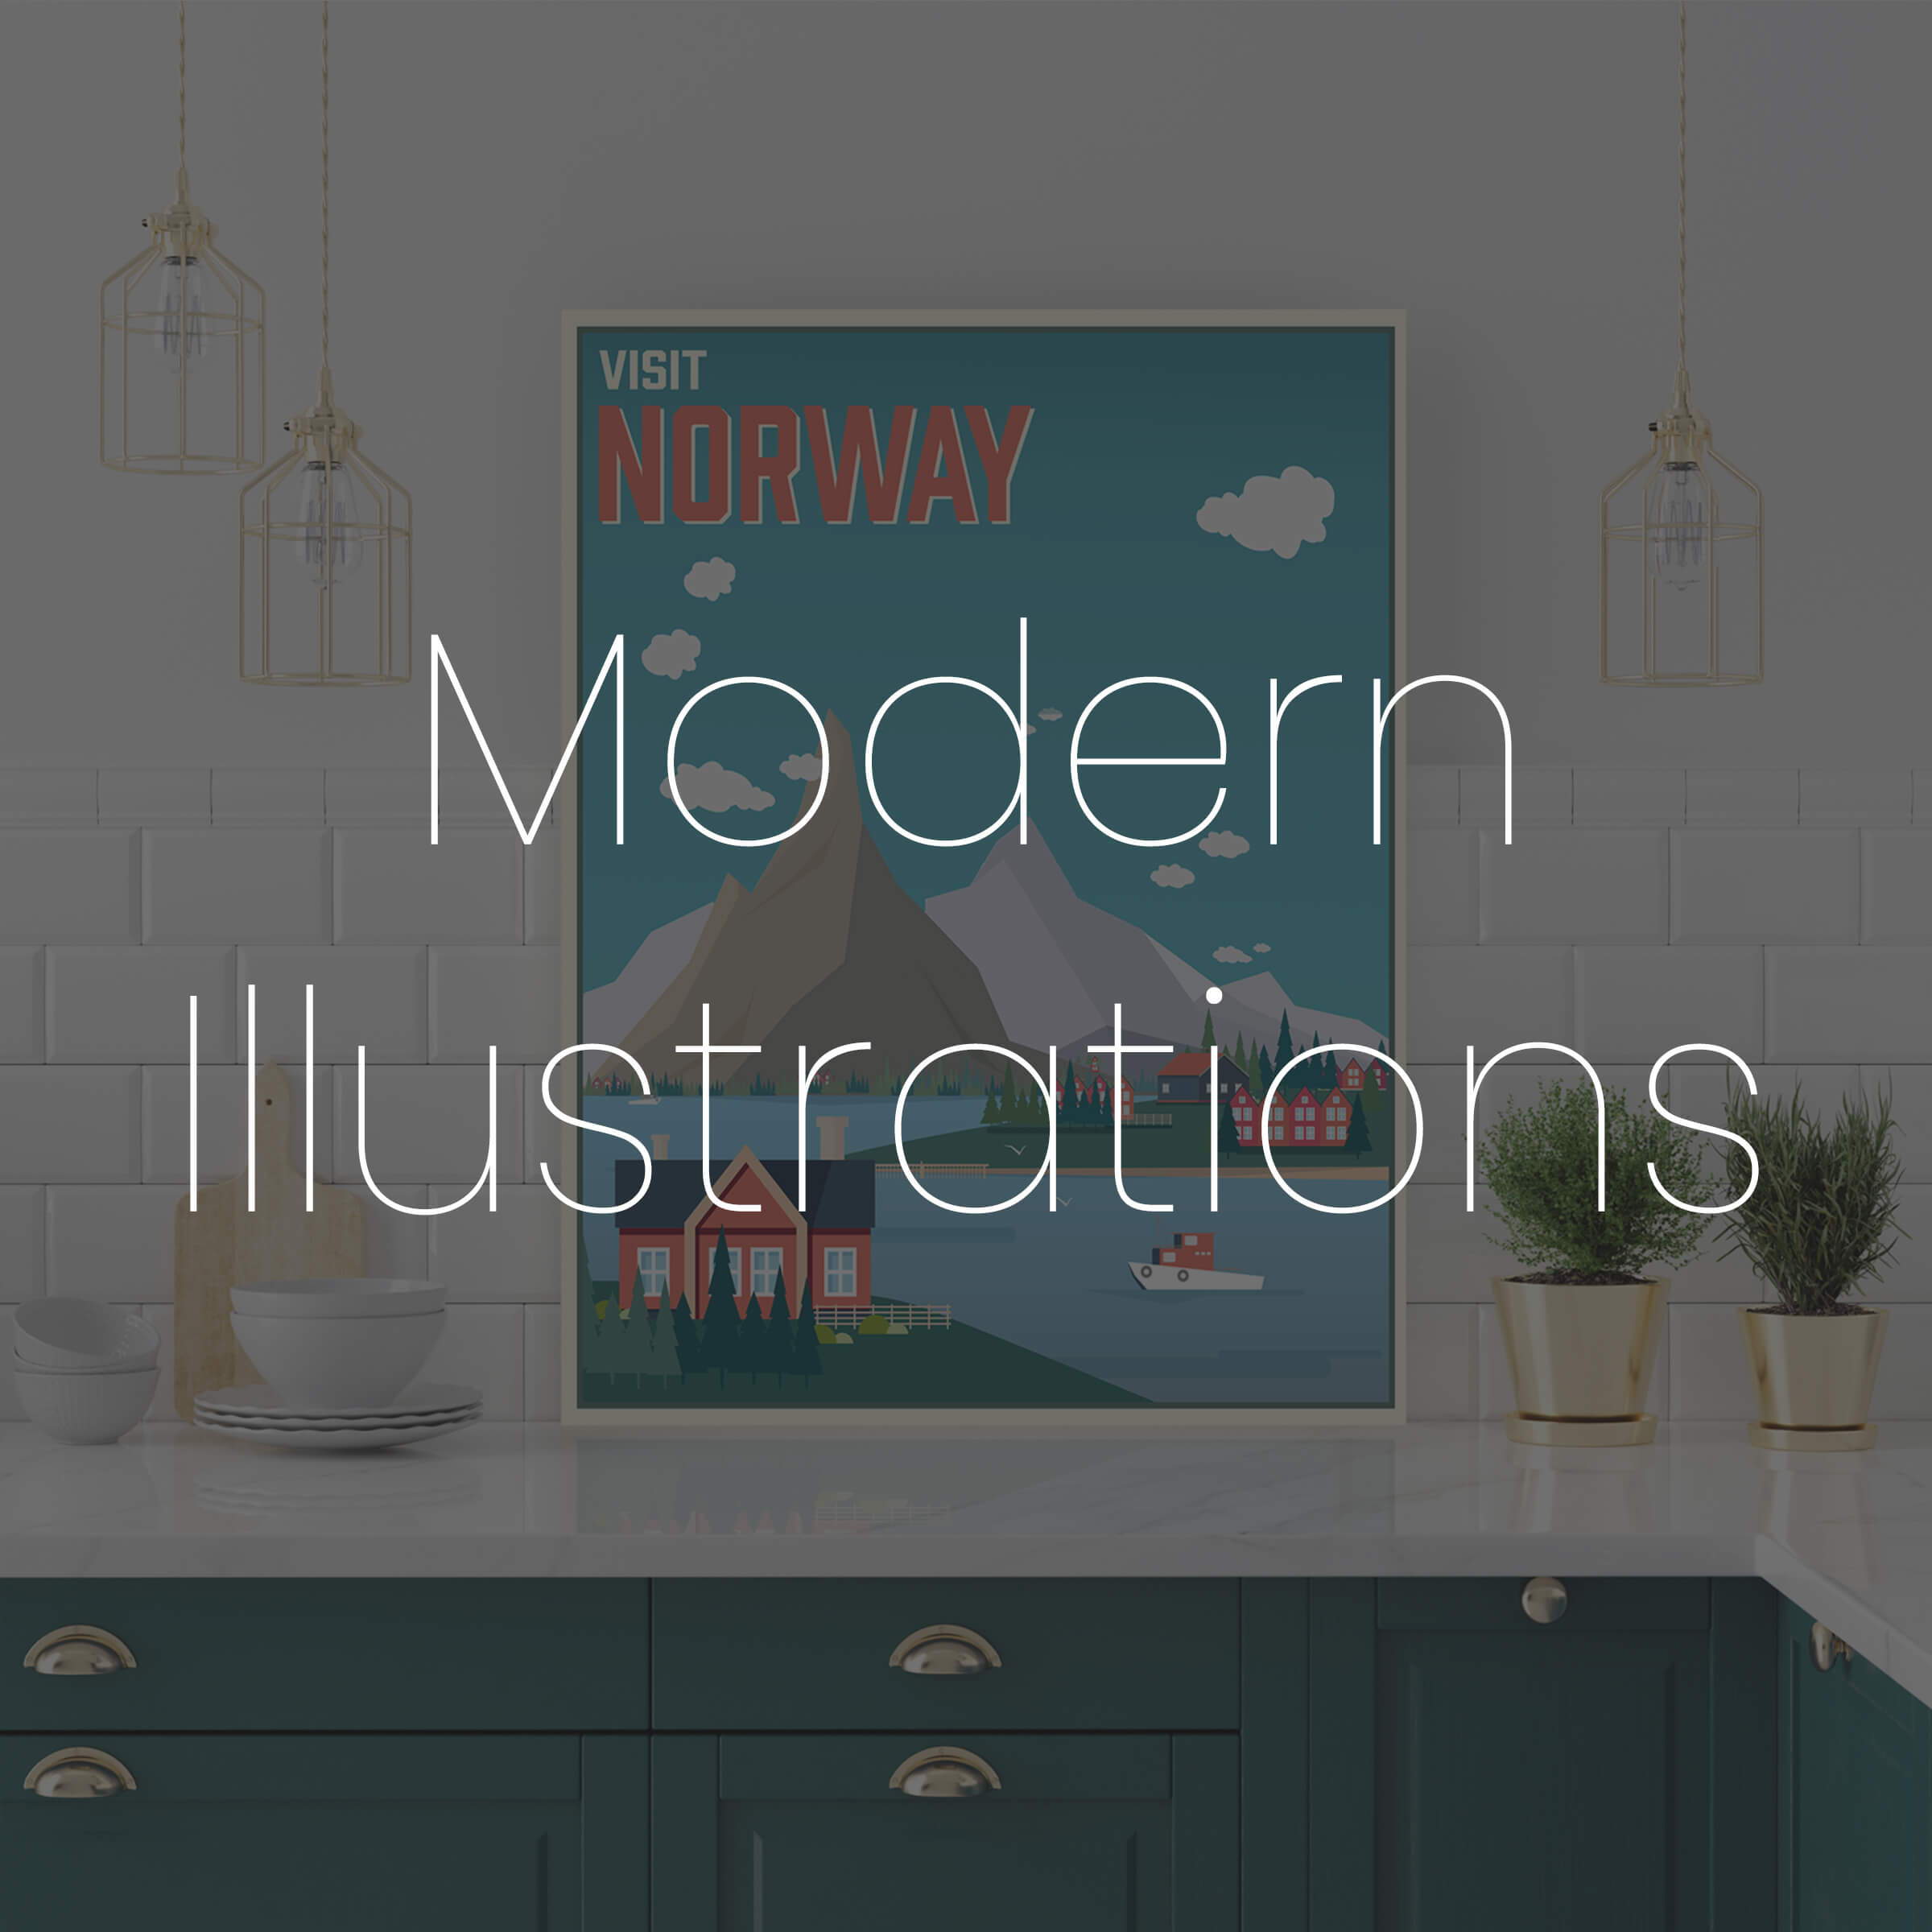 Add creative illustrations to your home decor!